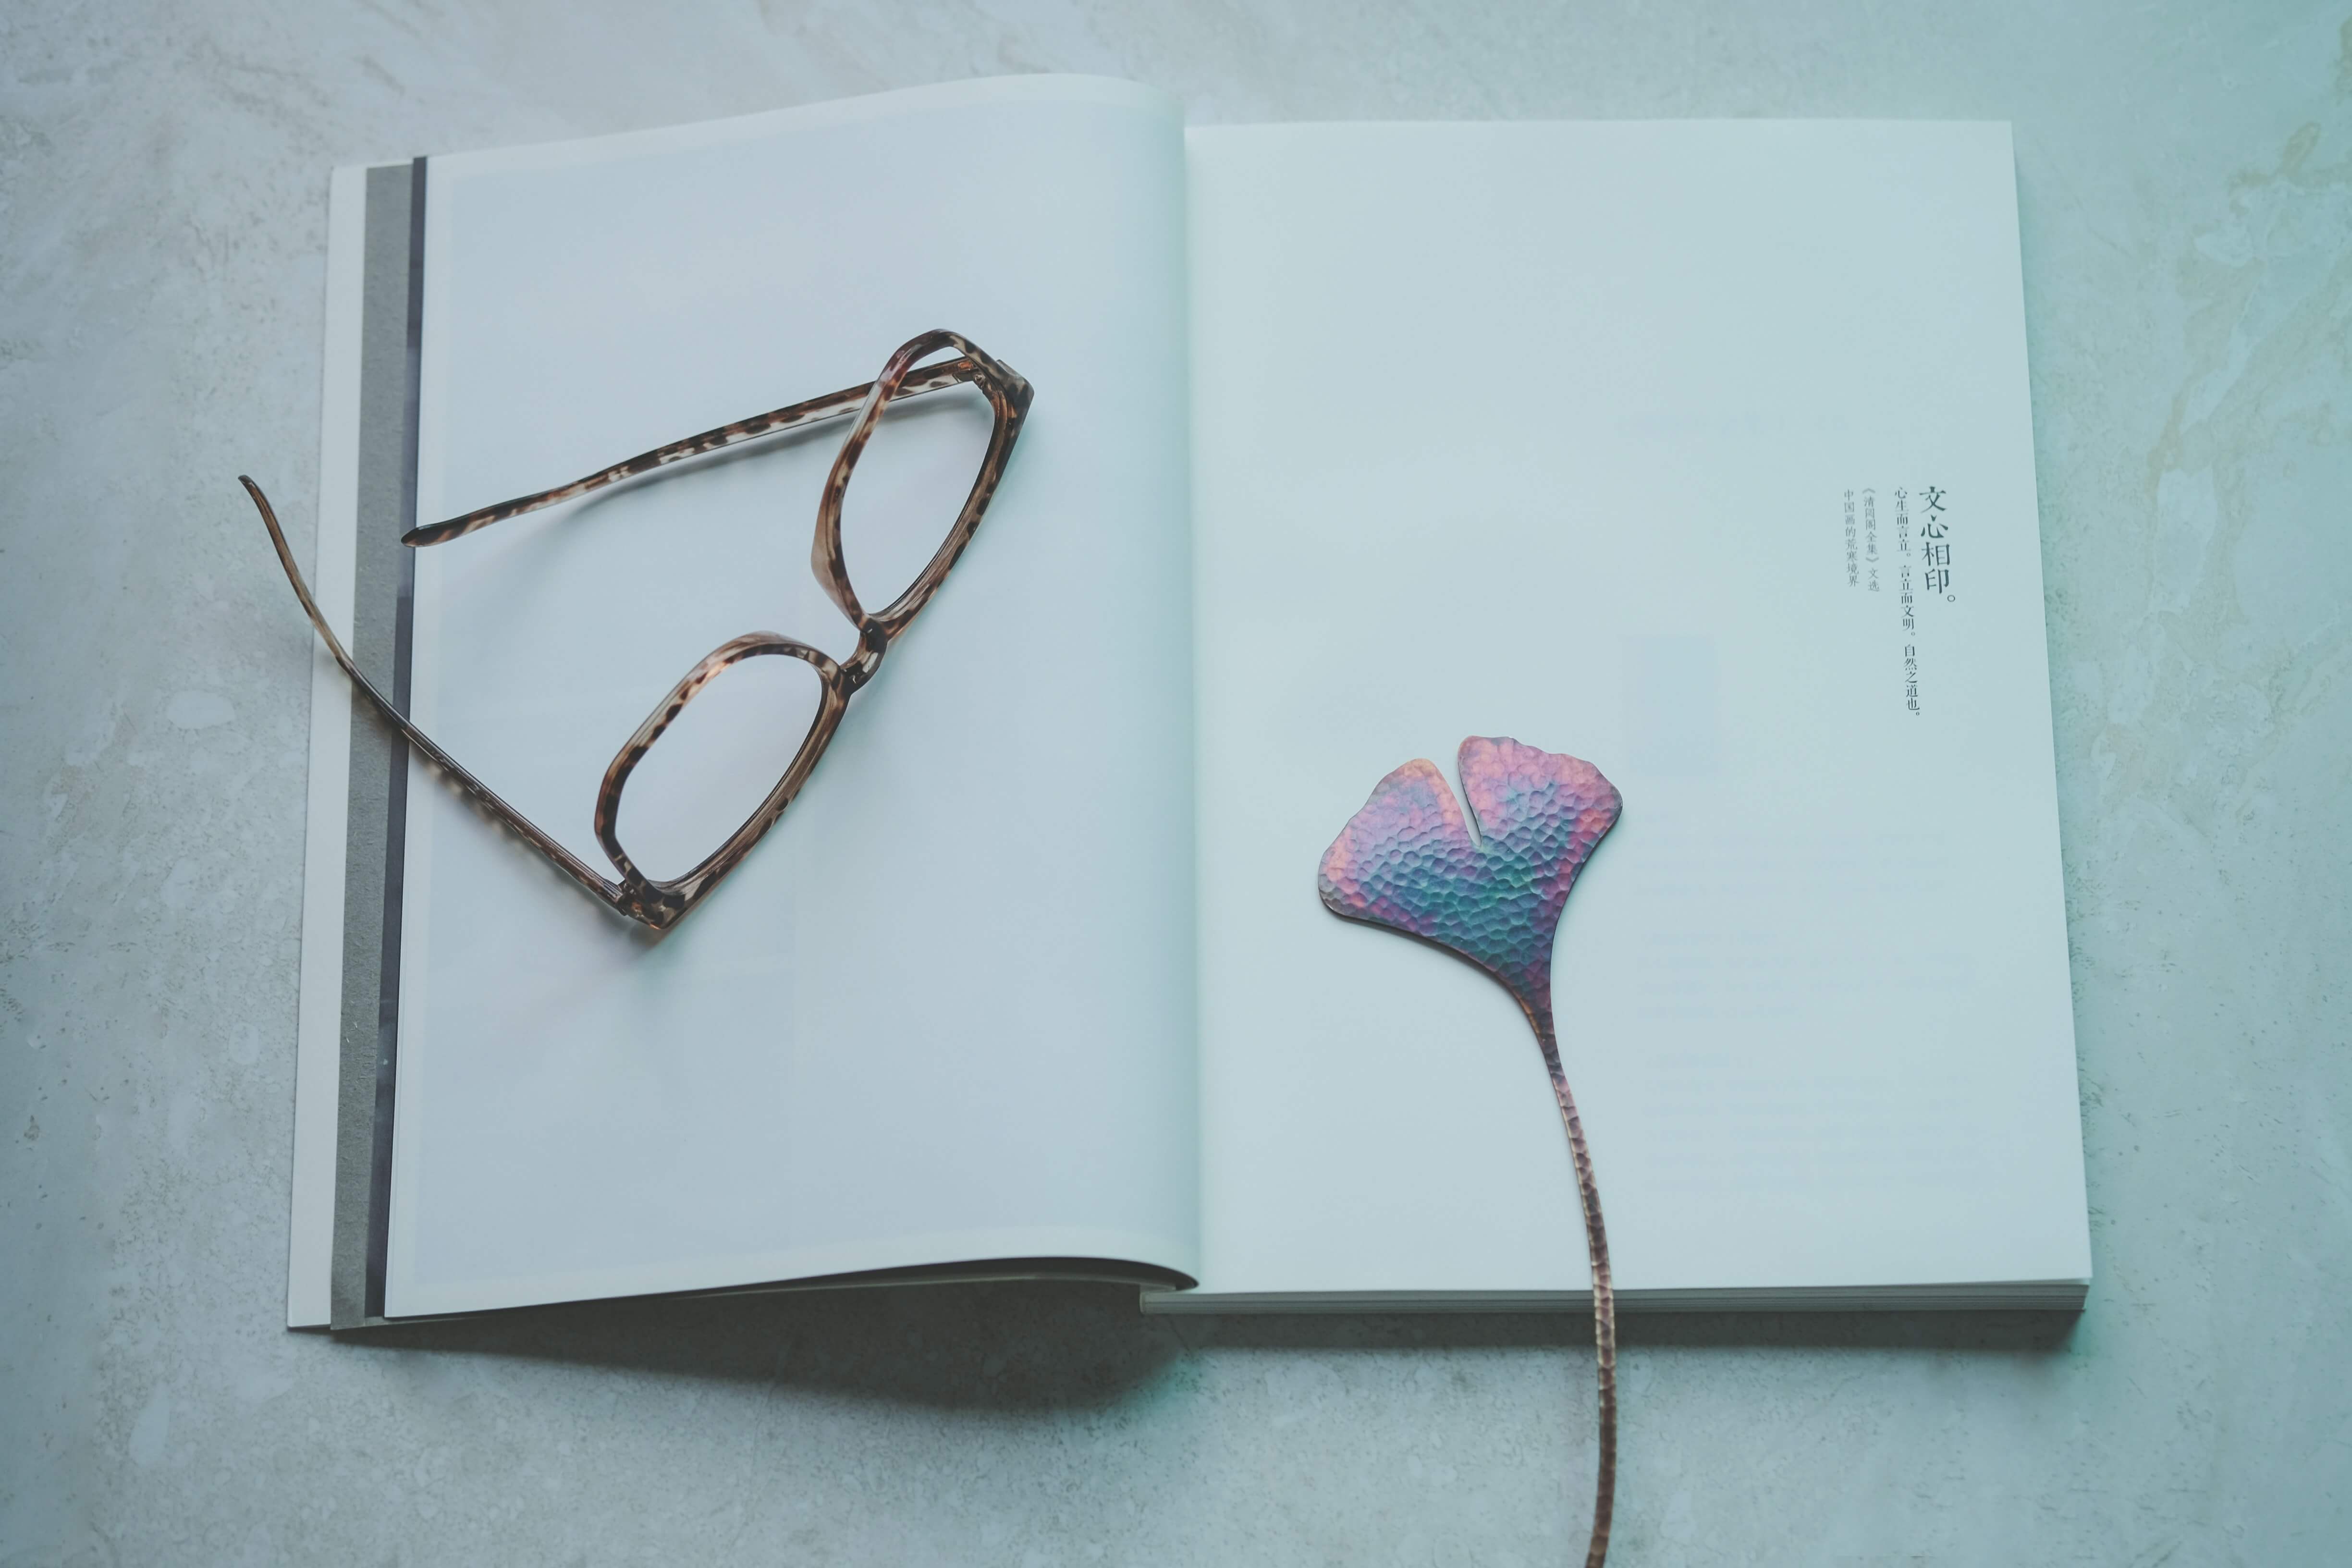 A metal bookmark and a pair of glasses resting on an open book